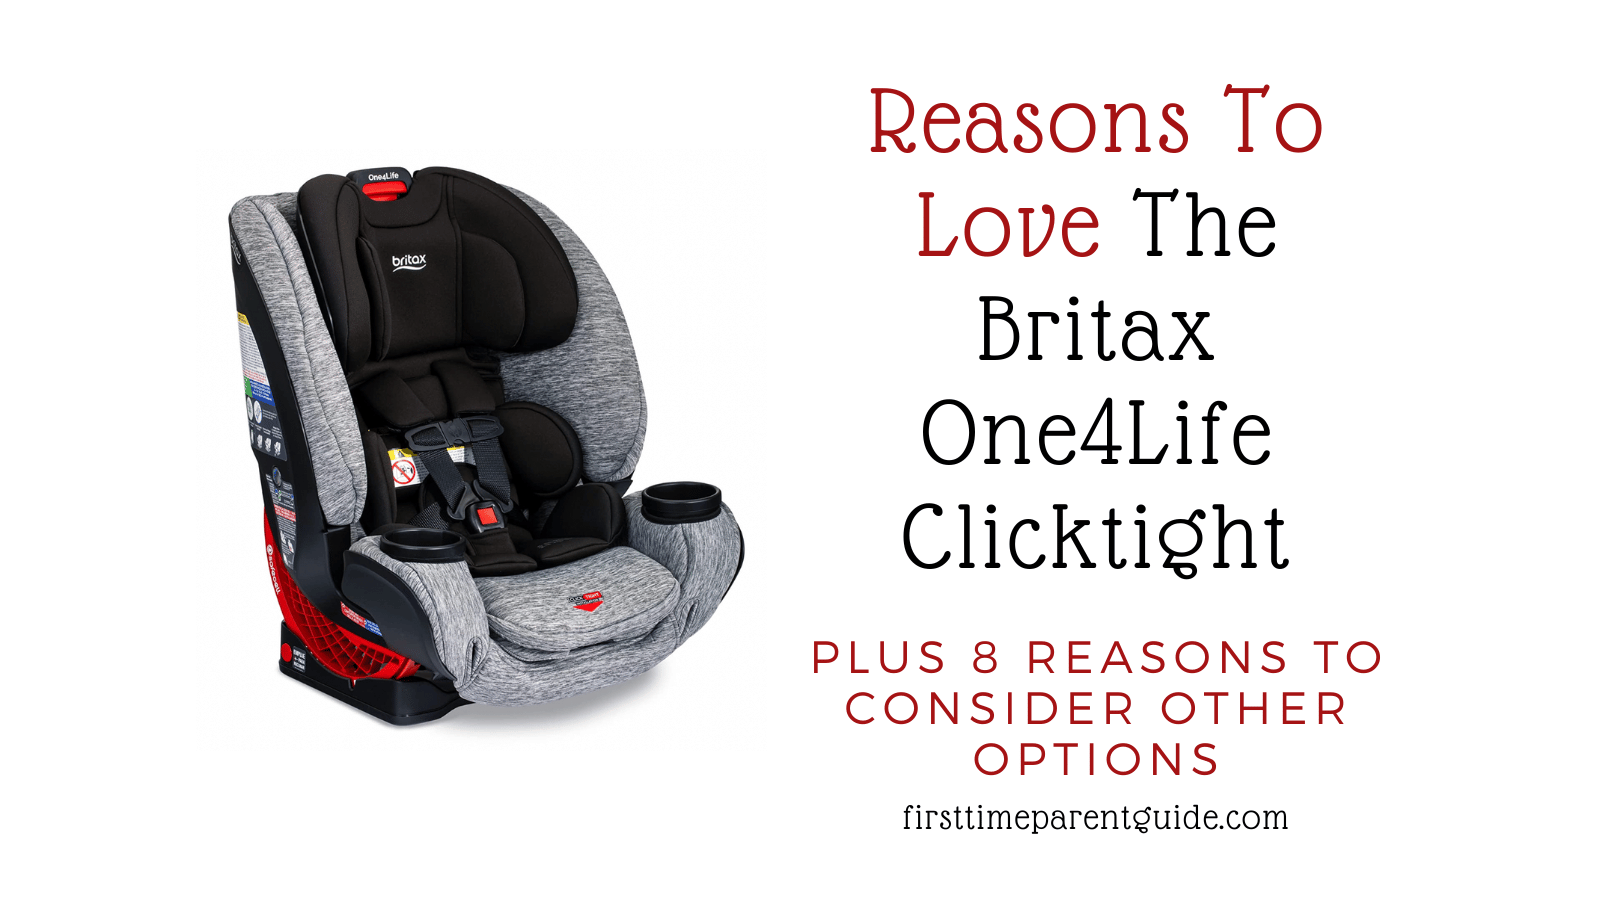 The Britax One4Life Clicktight